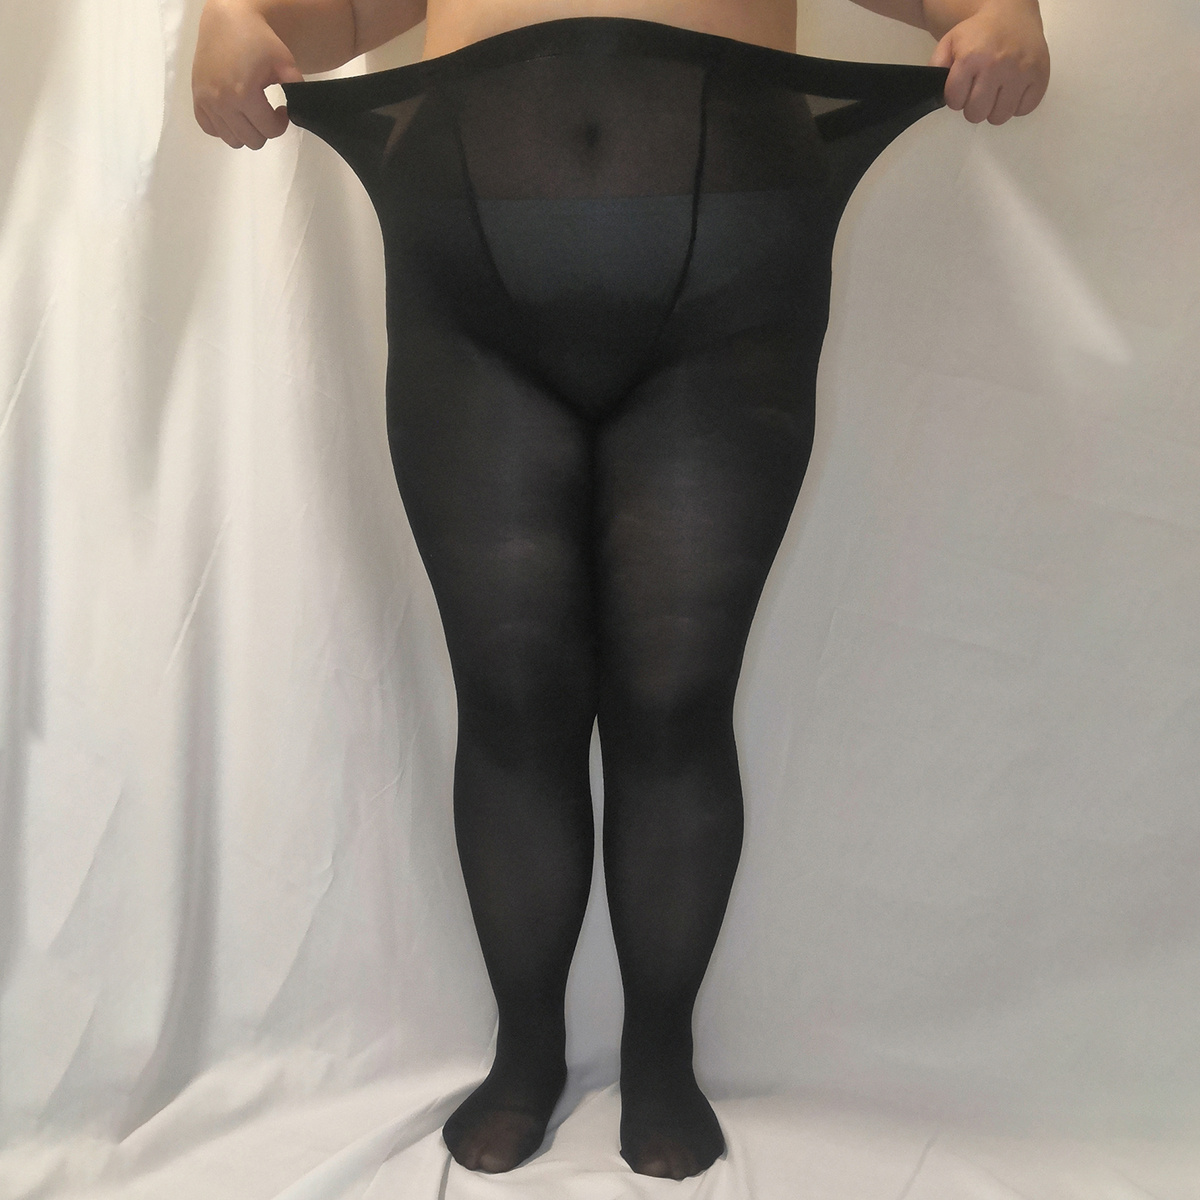 80D Opaque Tights Plus Size - Comfy Queen Size Tights, Warm Straight Crotch  Leggings, For Chubby Women, Girls